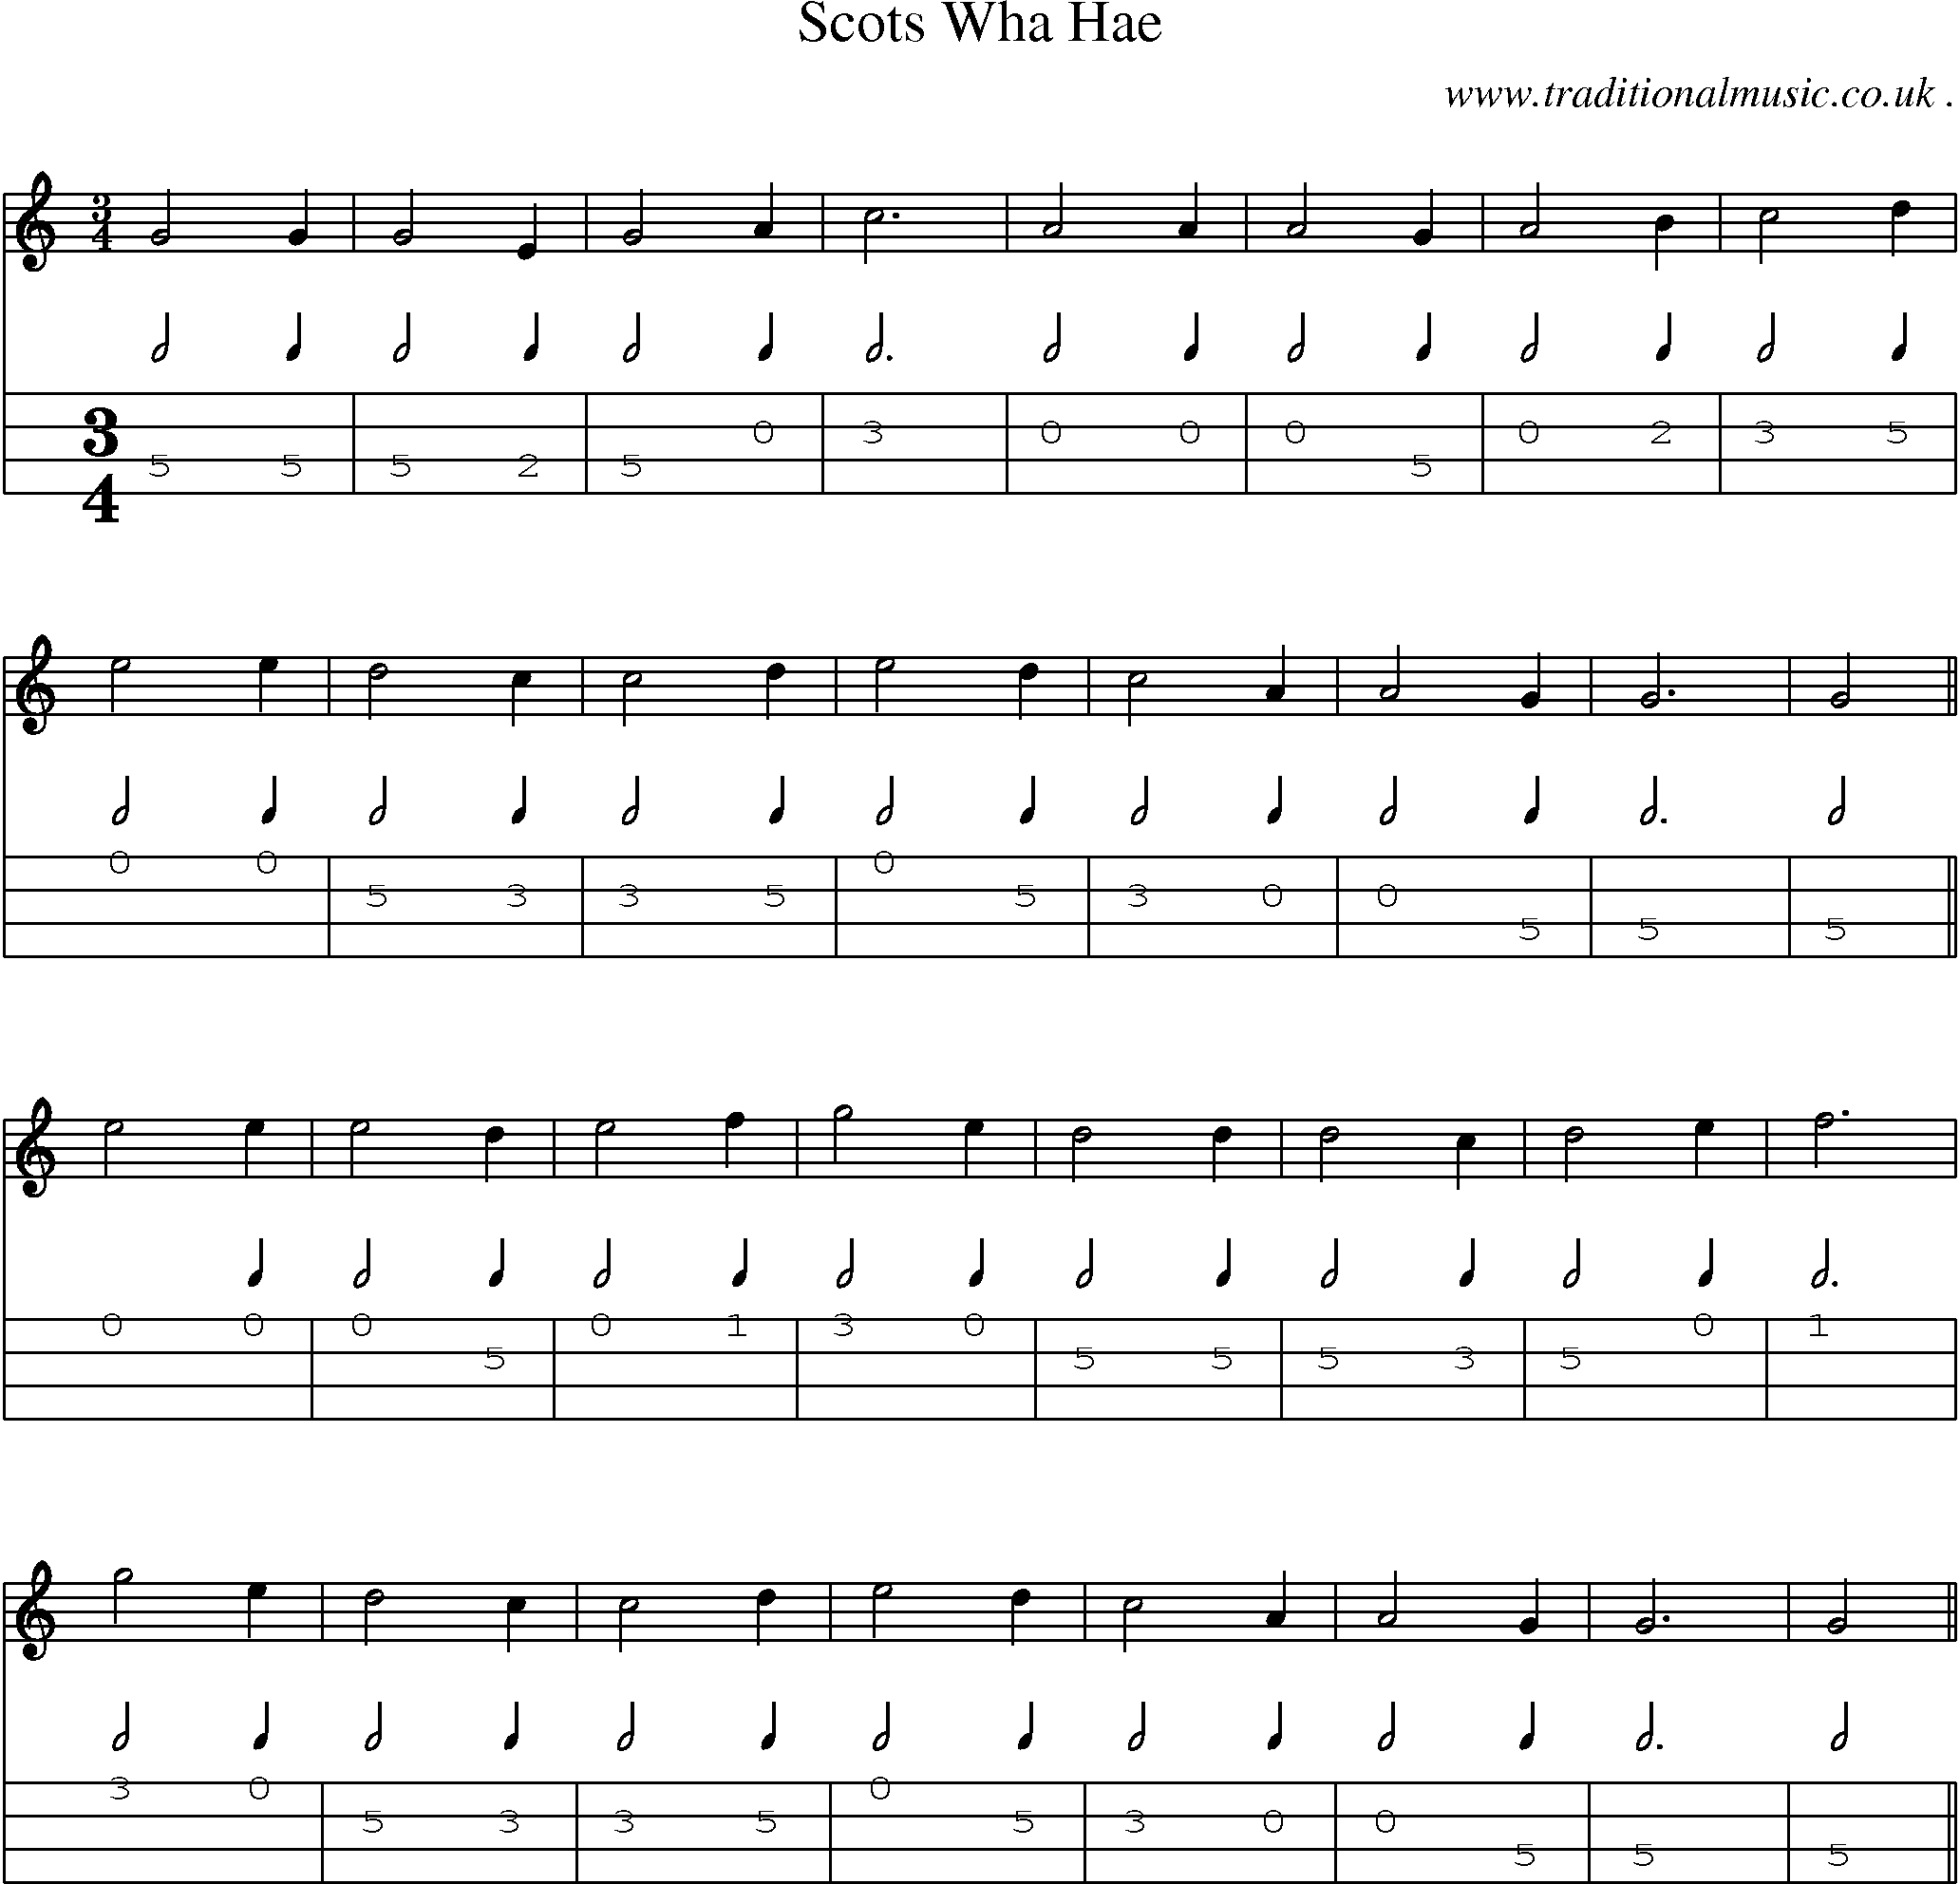 Sheet-music  score, Chords and Mandolin Tabs for Scots Wha Hae